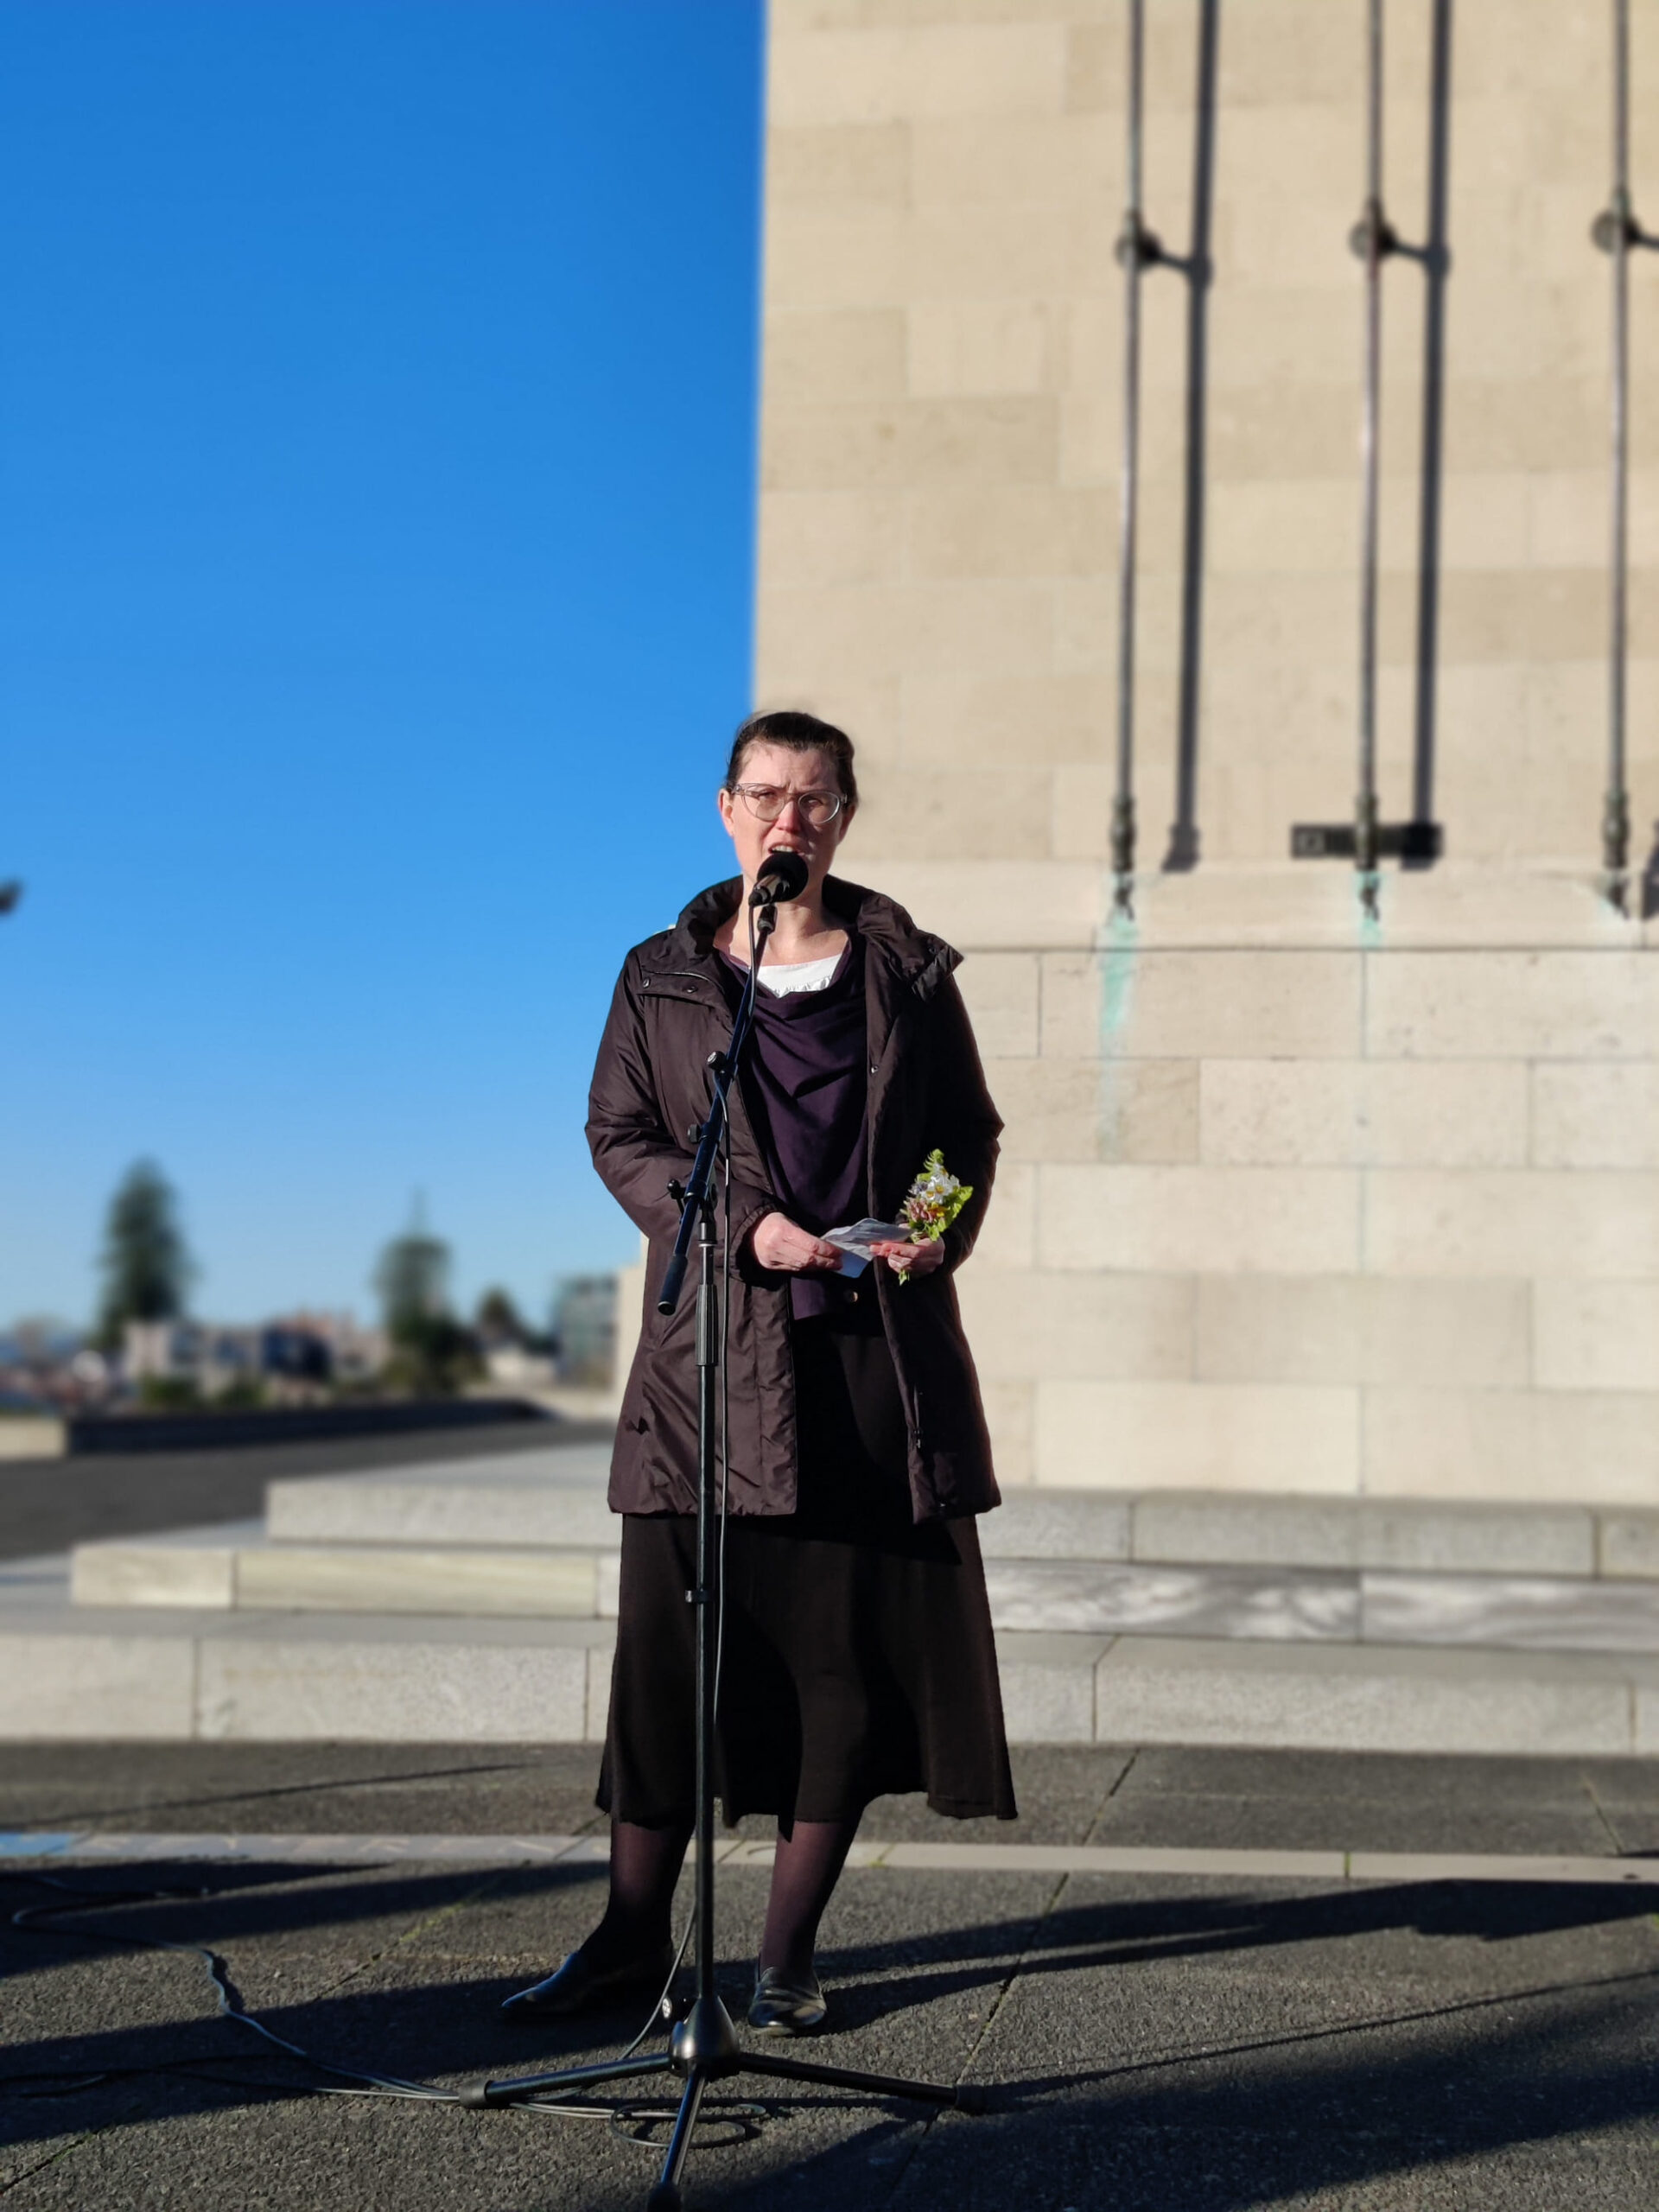 A woman in black speaks into a microphone in front of a cenotaph